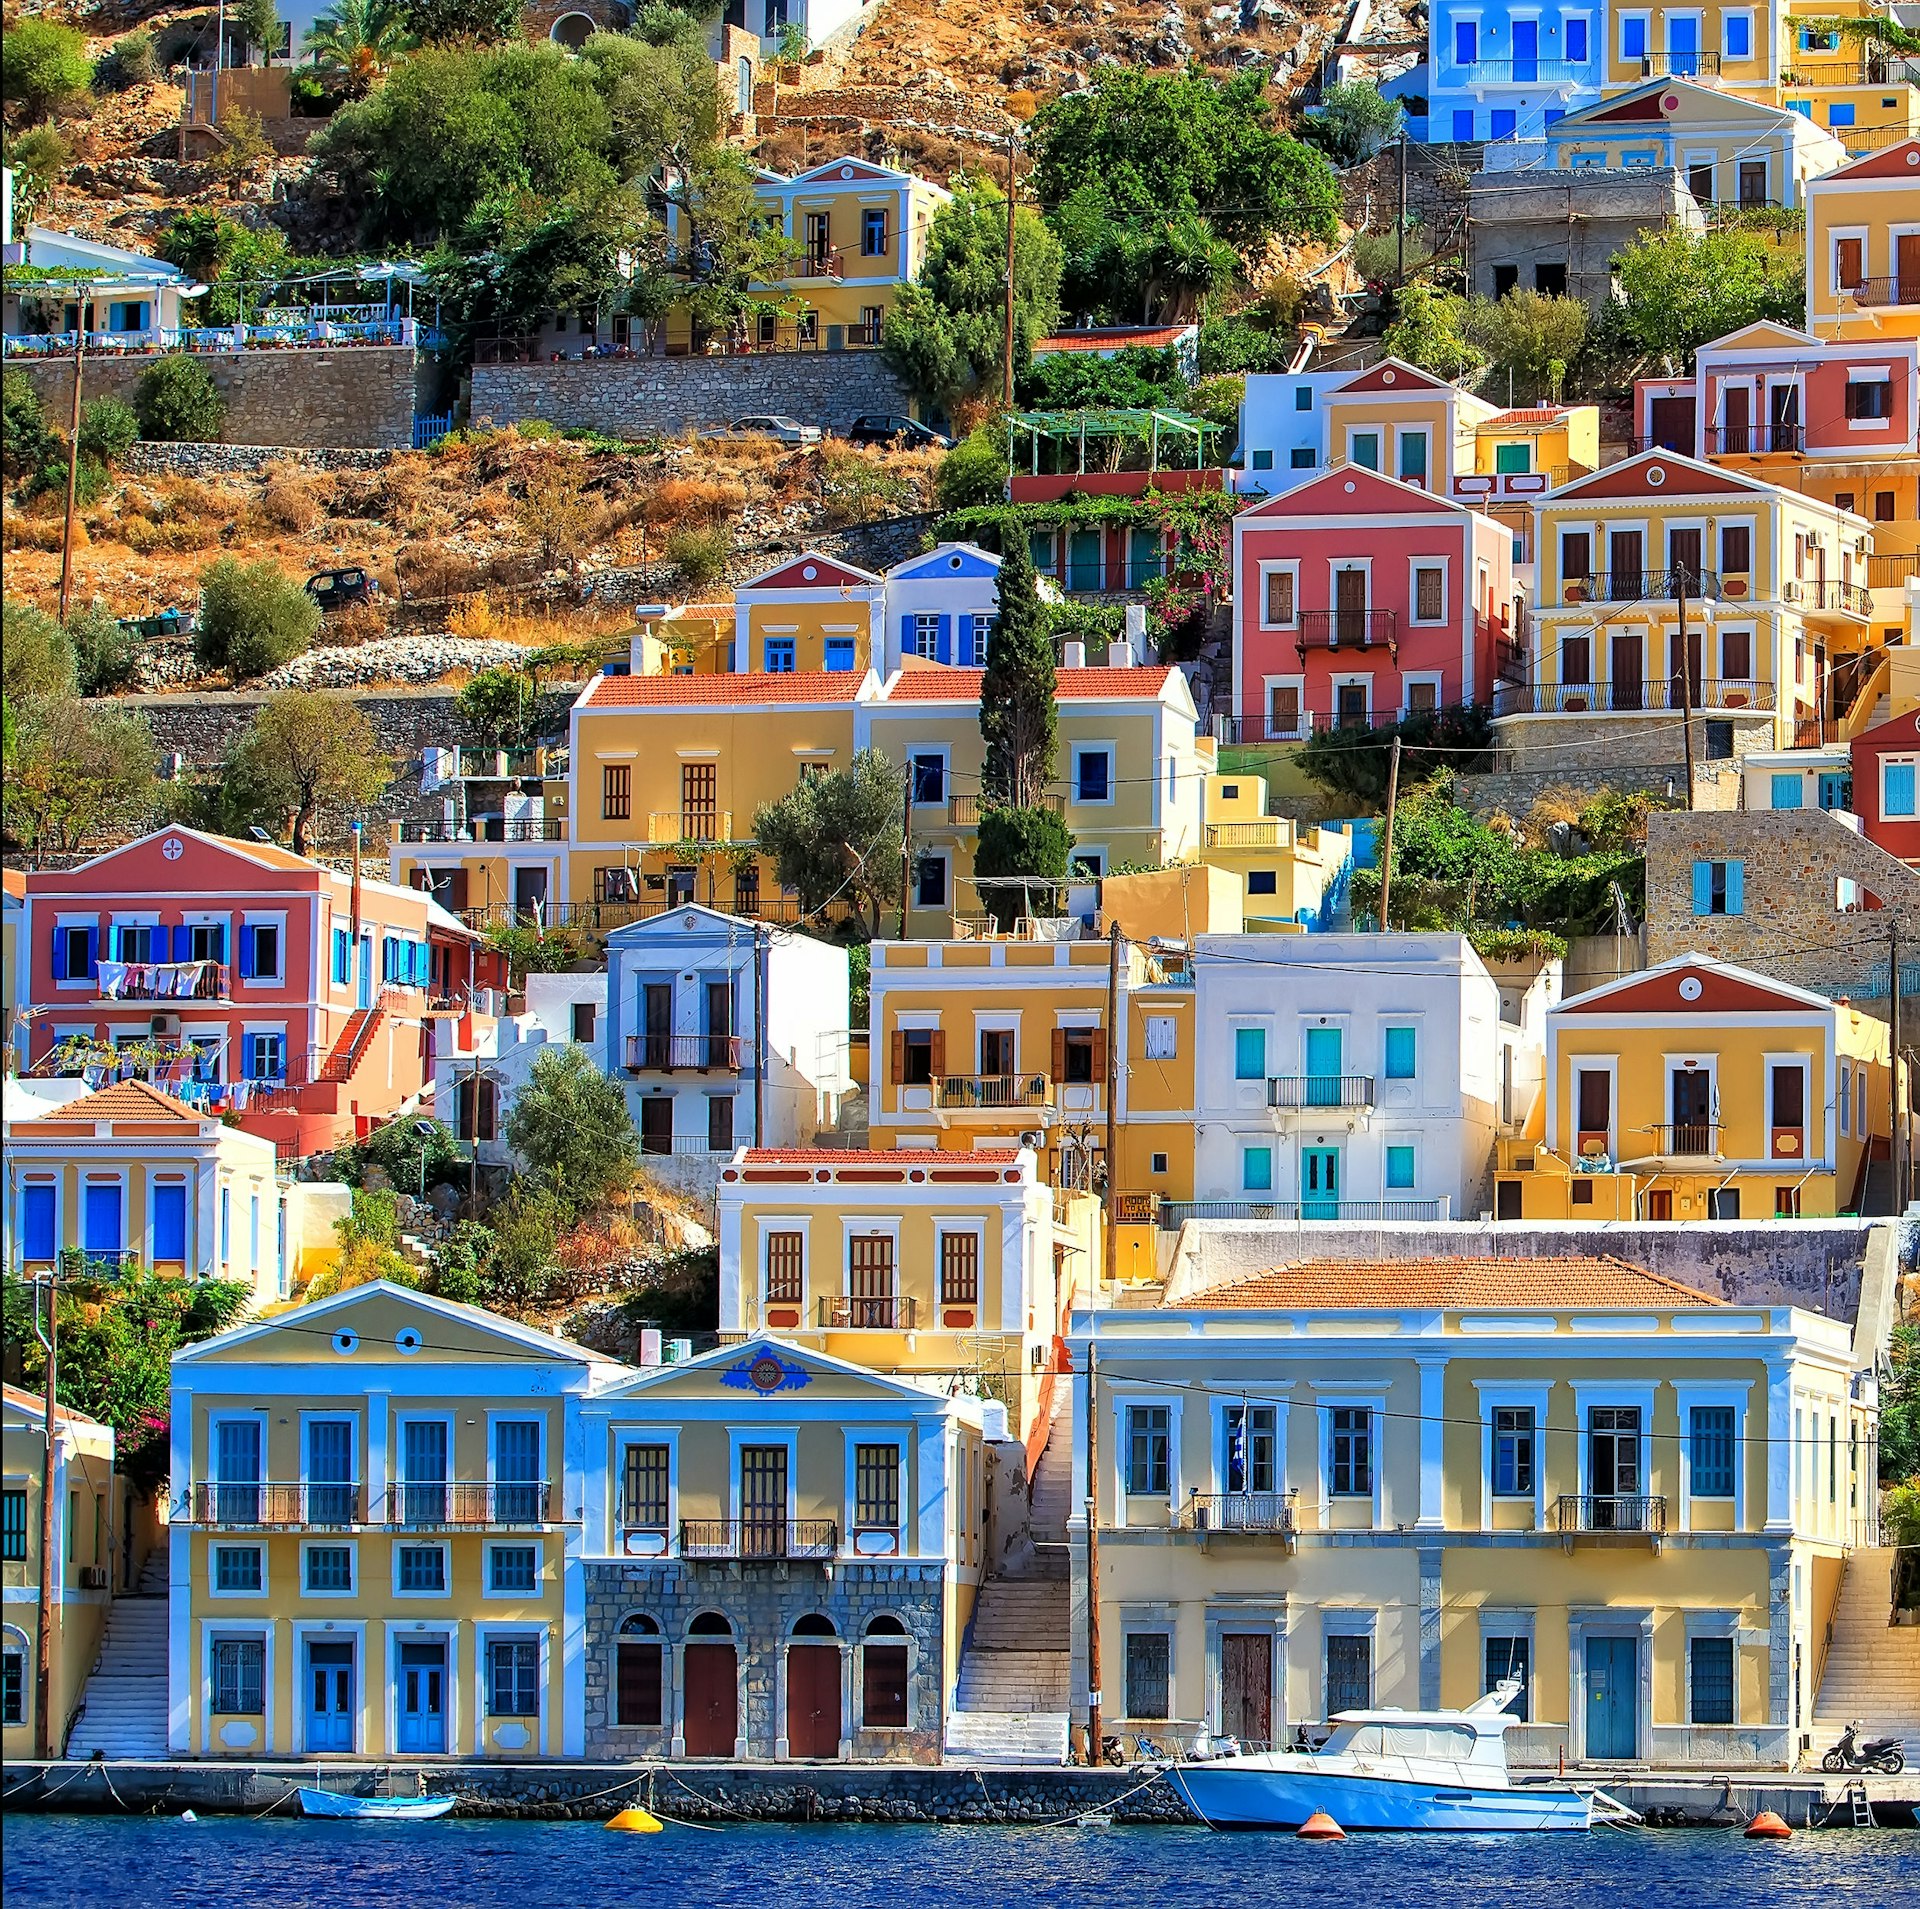 Houses with colorful facades cover a hillside in Greece